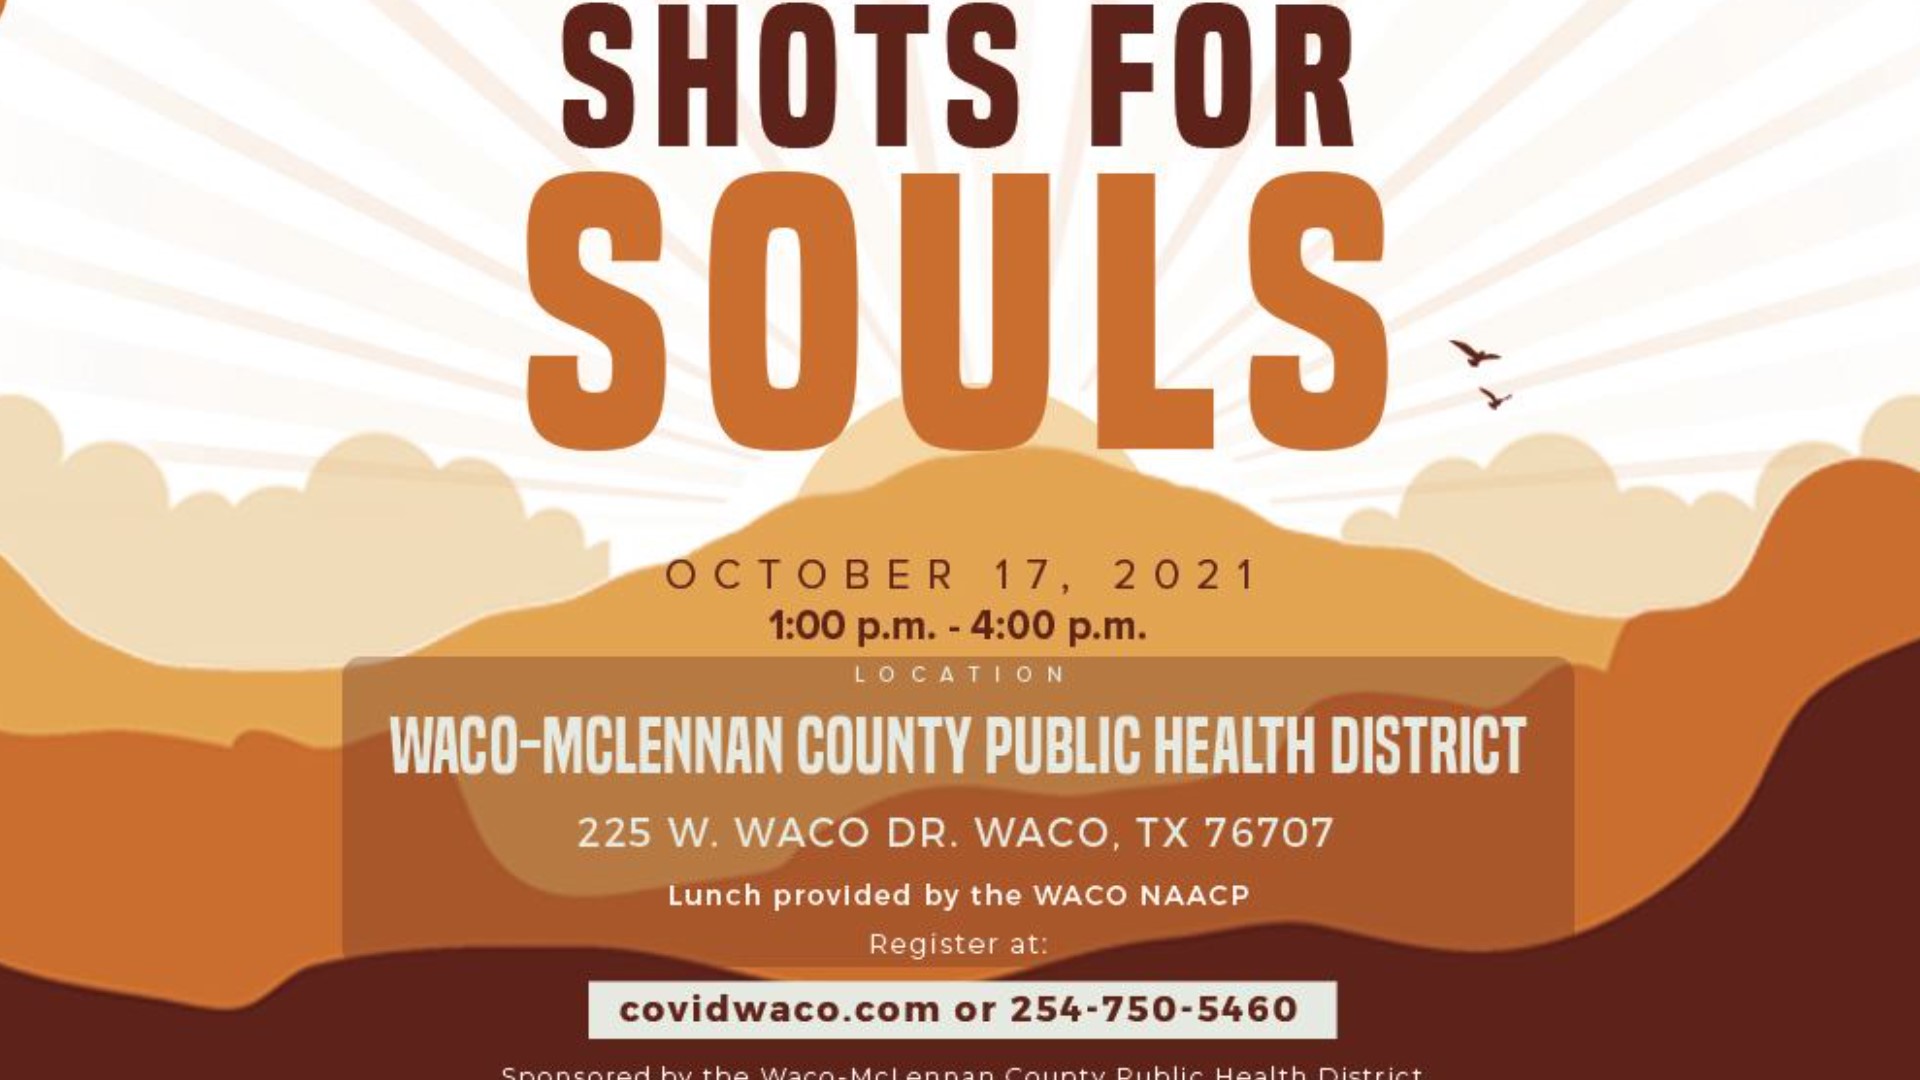 In McLennan County, the health district is taking action to get more African Americans vaccinated against COVID-19.